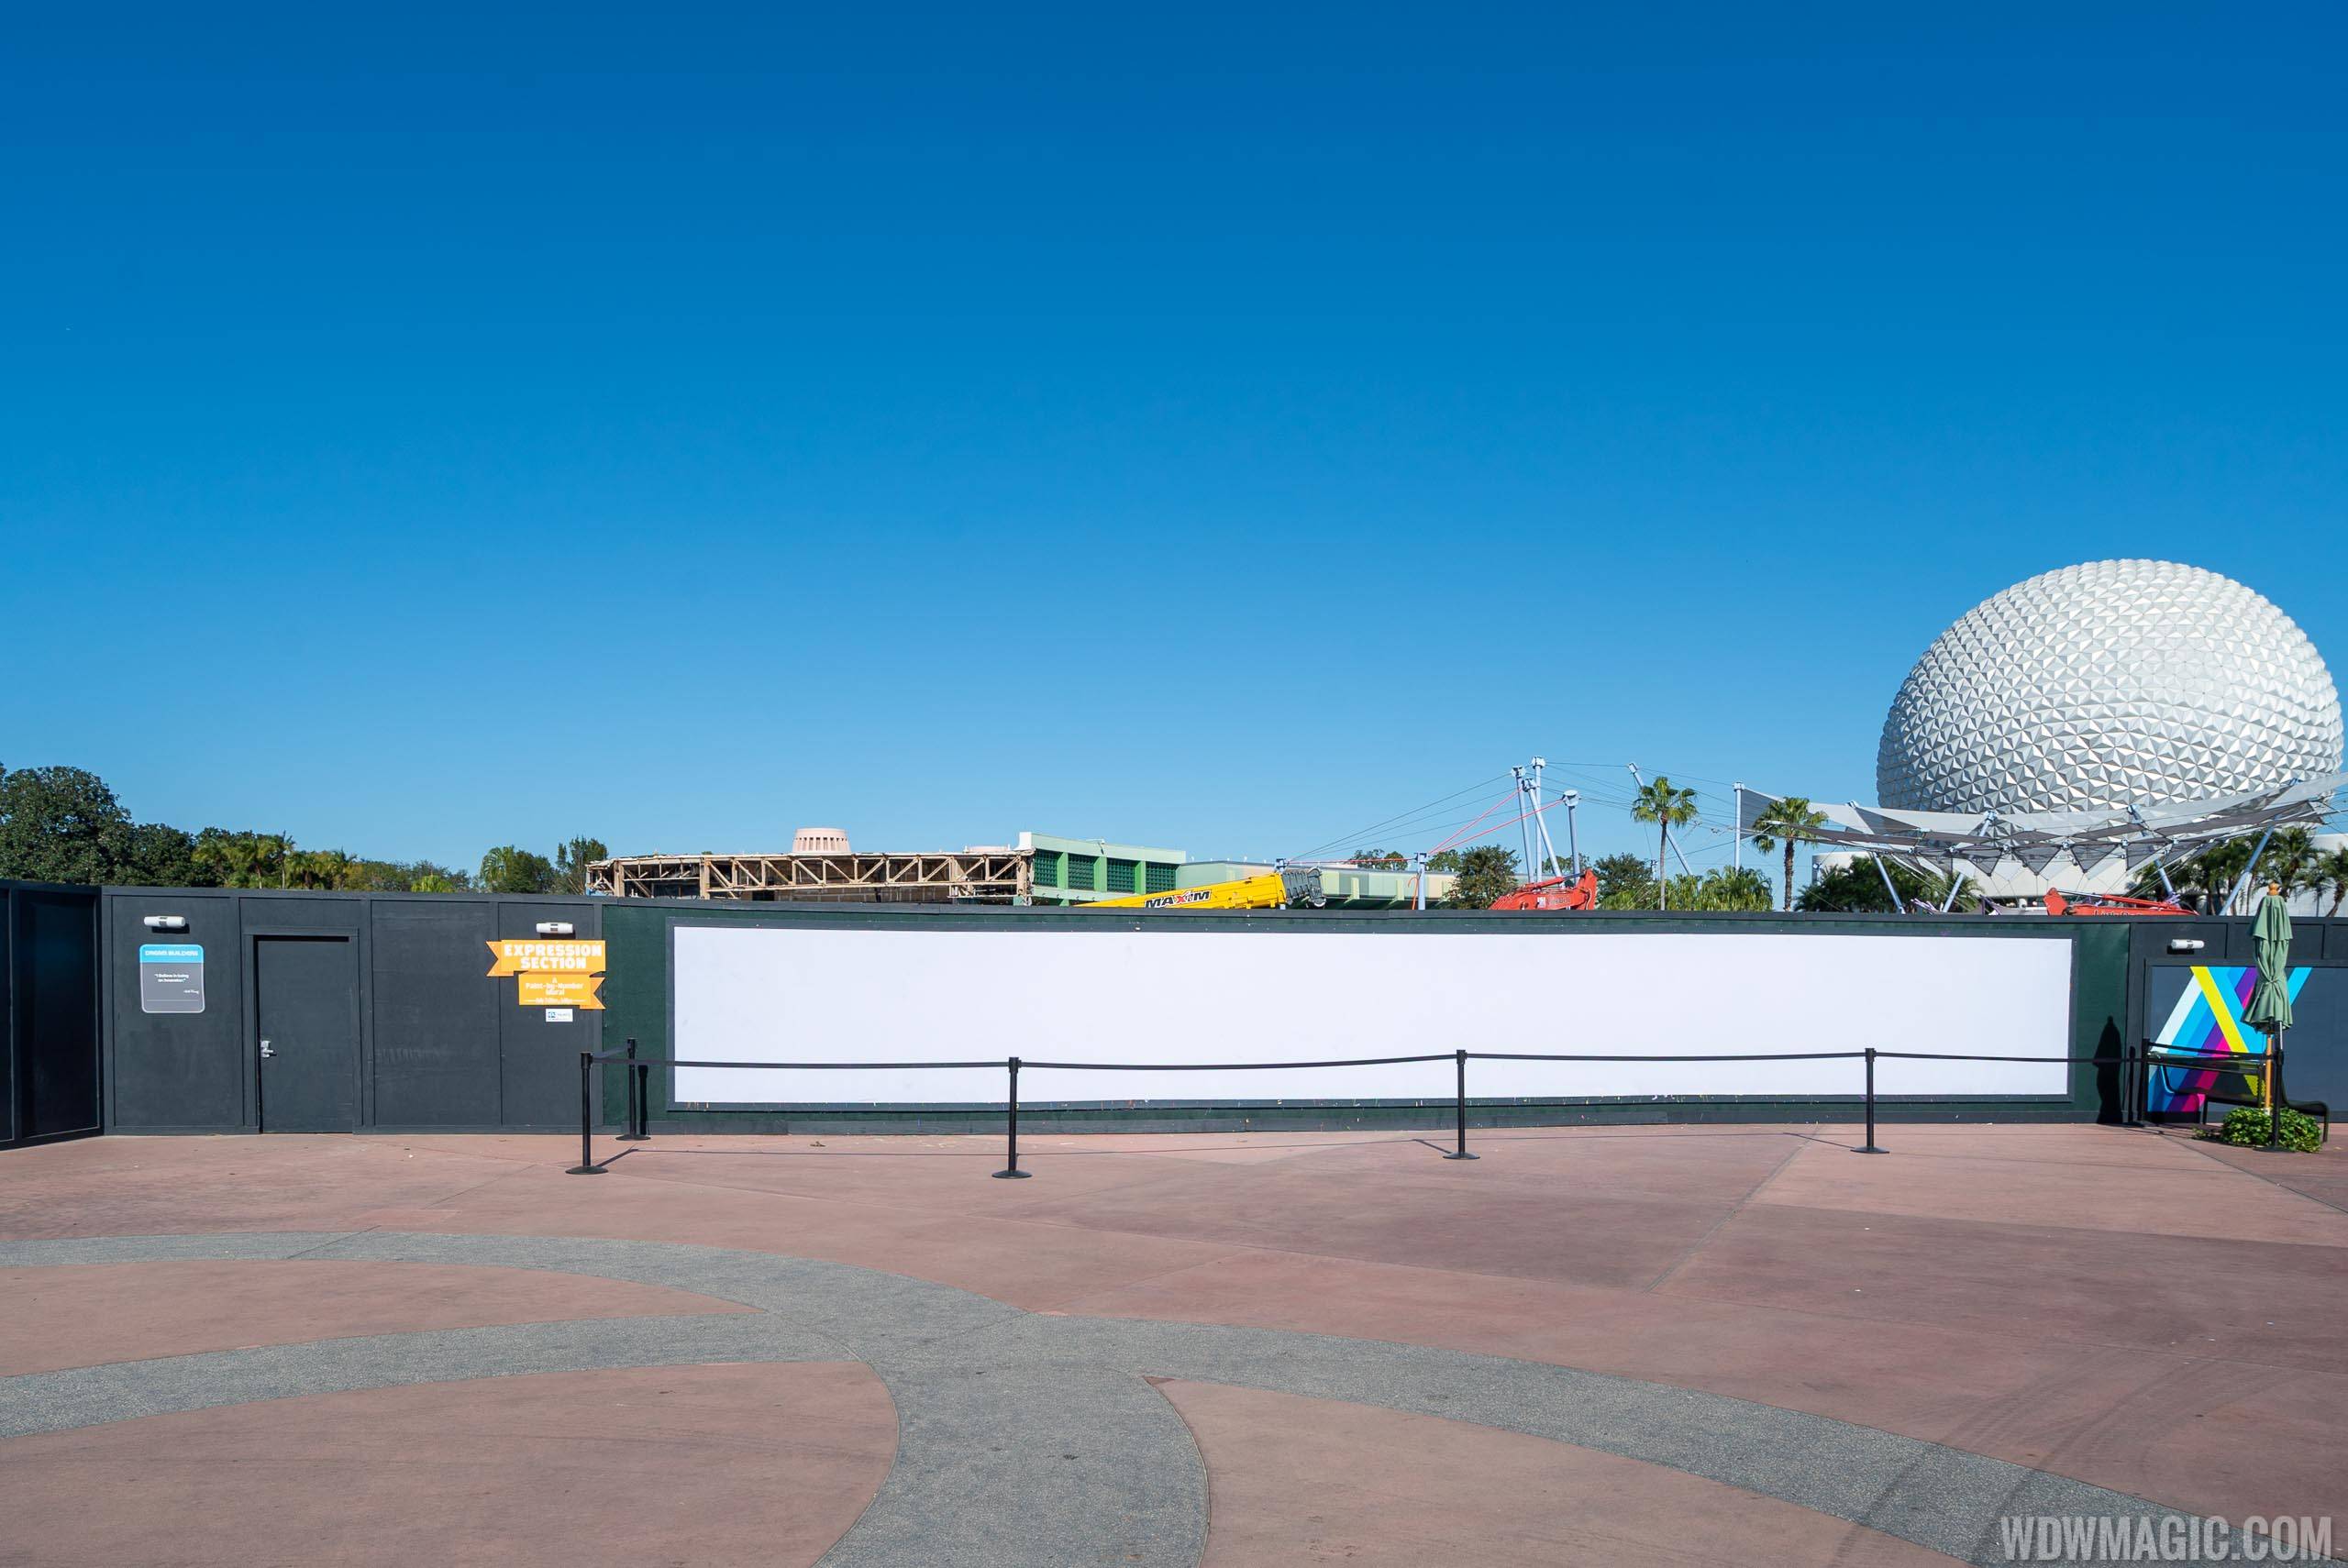 Epcot Future World West Demolition and Construction Walls - January 21 2020